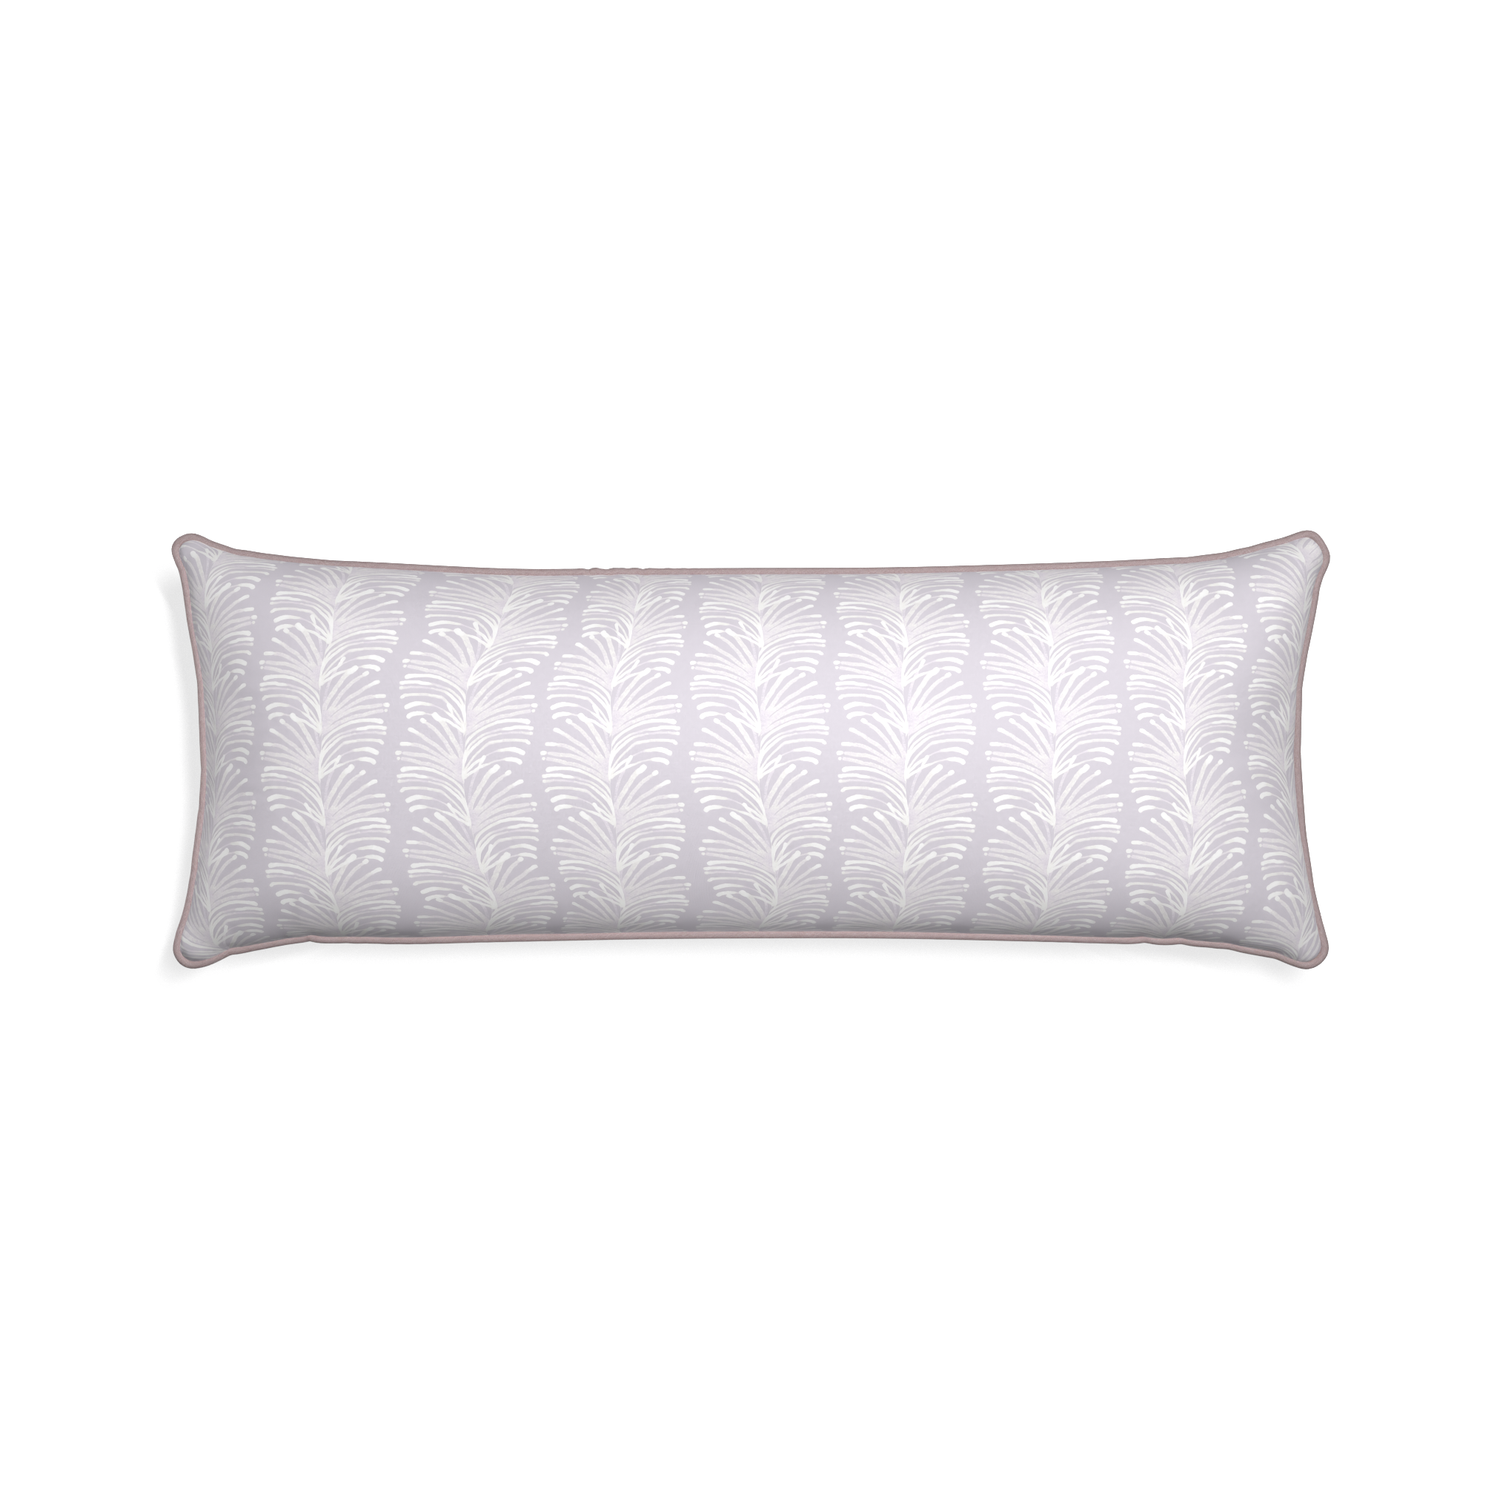 Xl-lumbar emma lavender custom lavender botanical stripepillow with orchid piping on white background